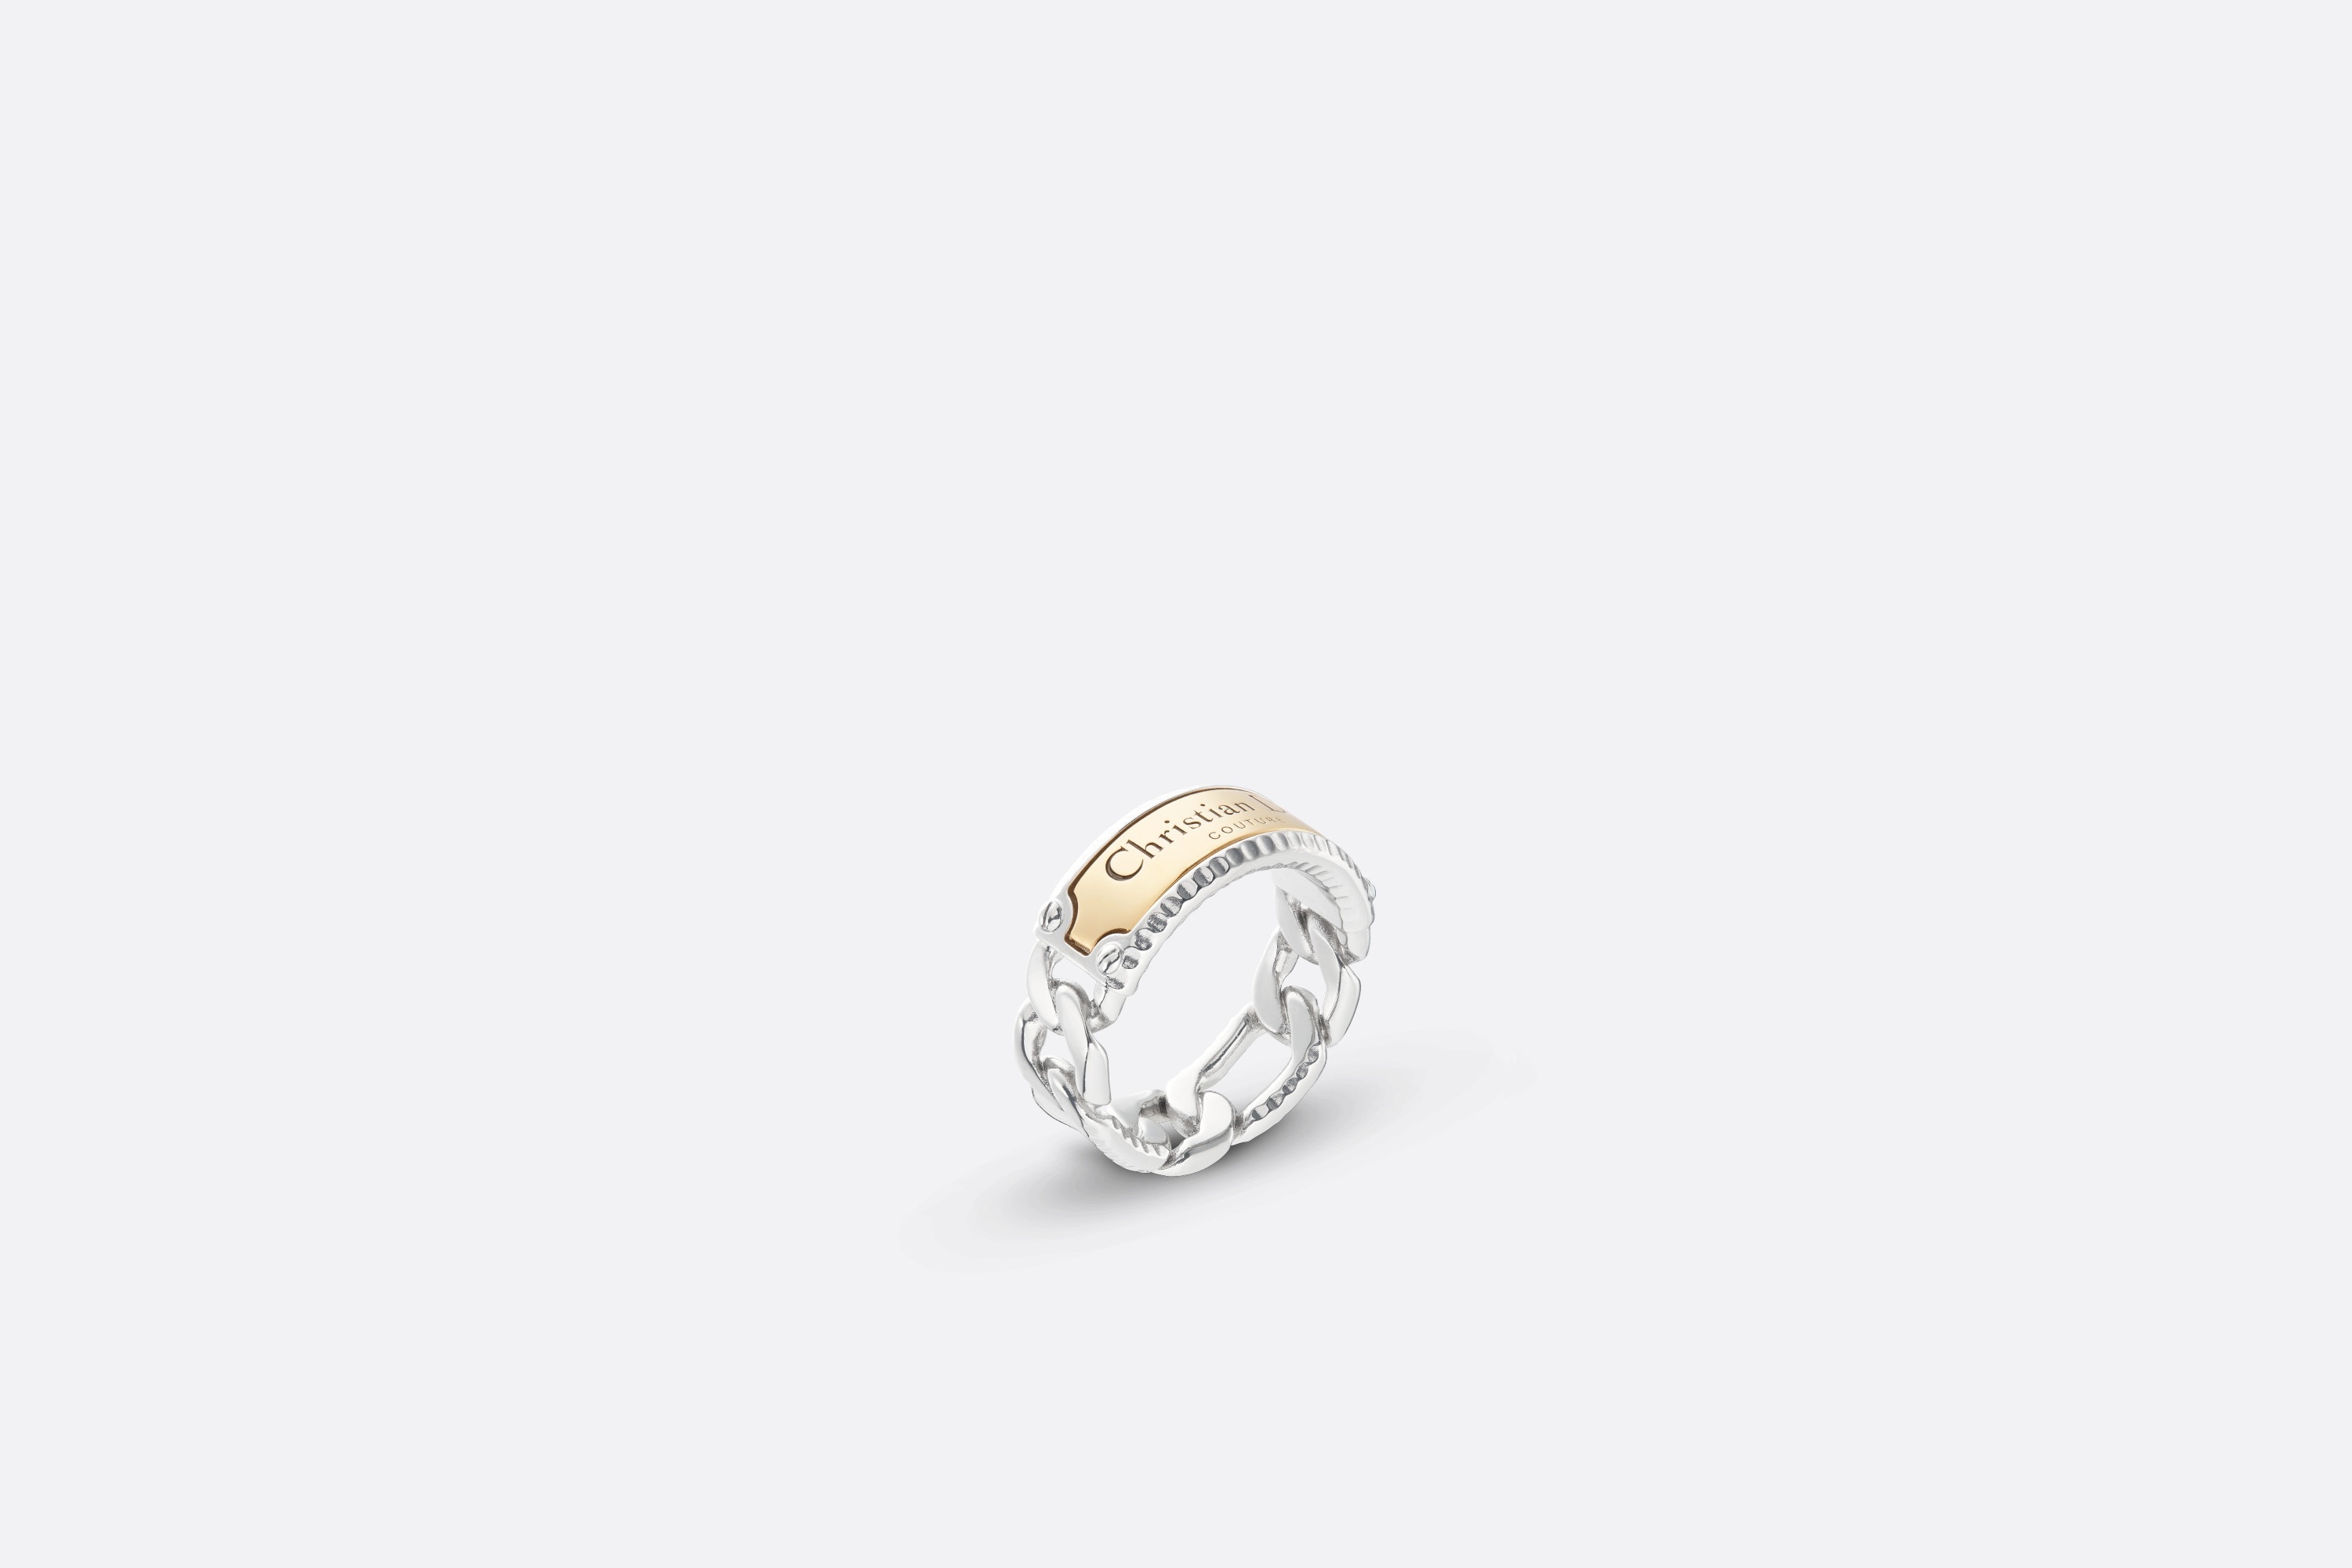 Christian Dior Couture Chain Link Ring - 5